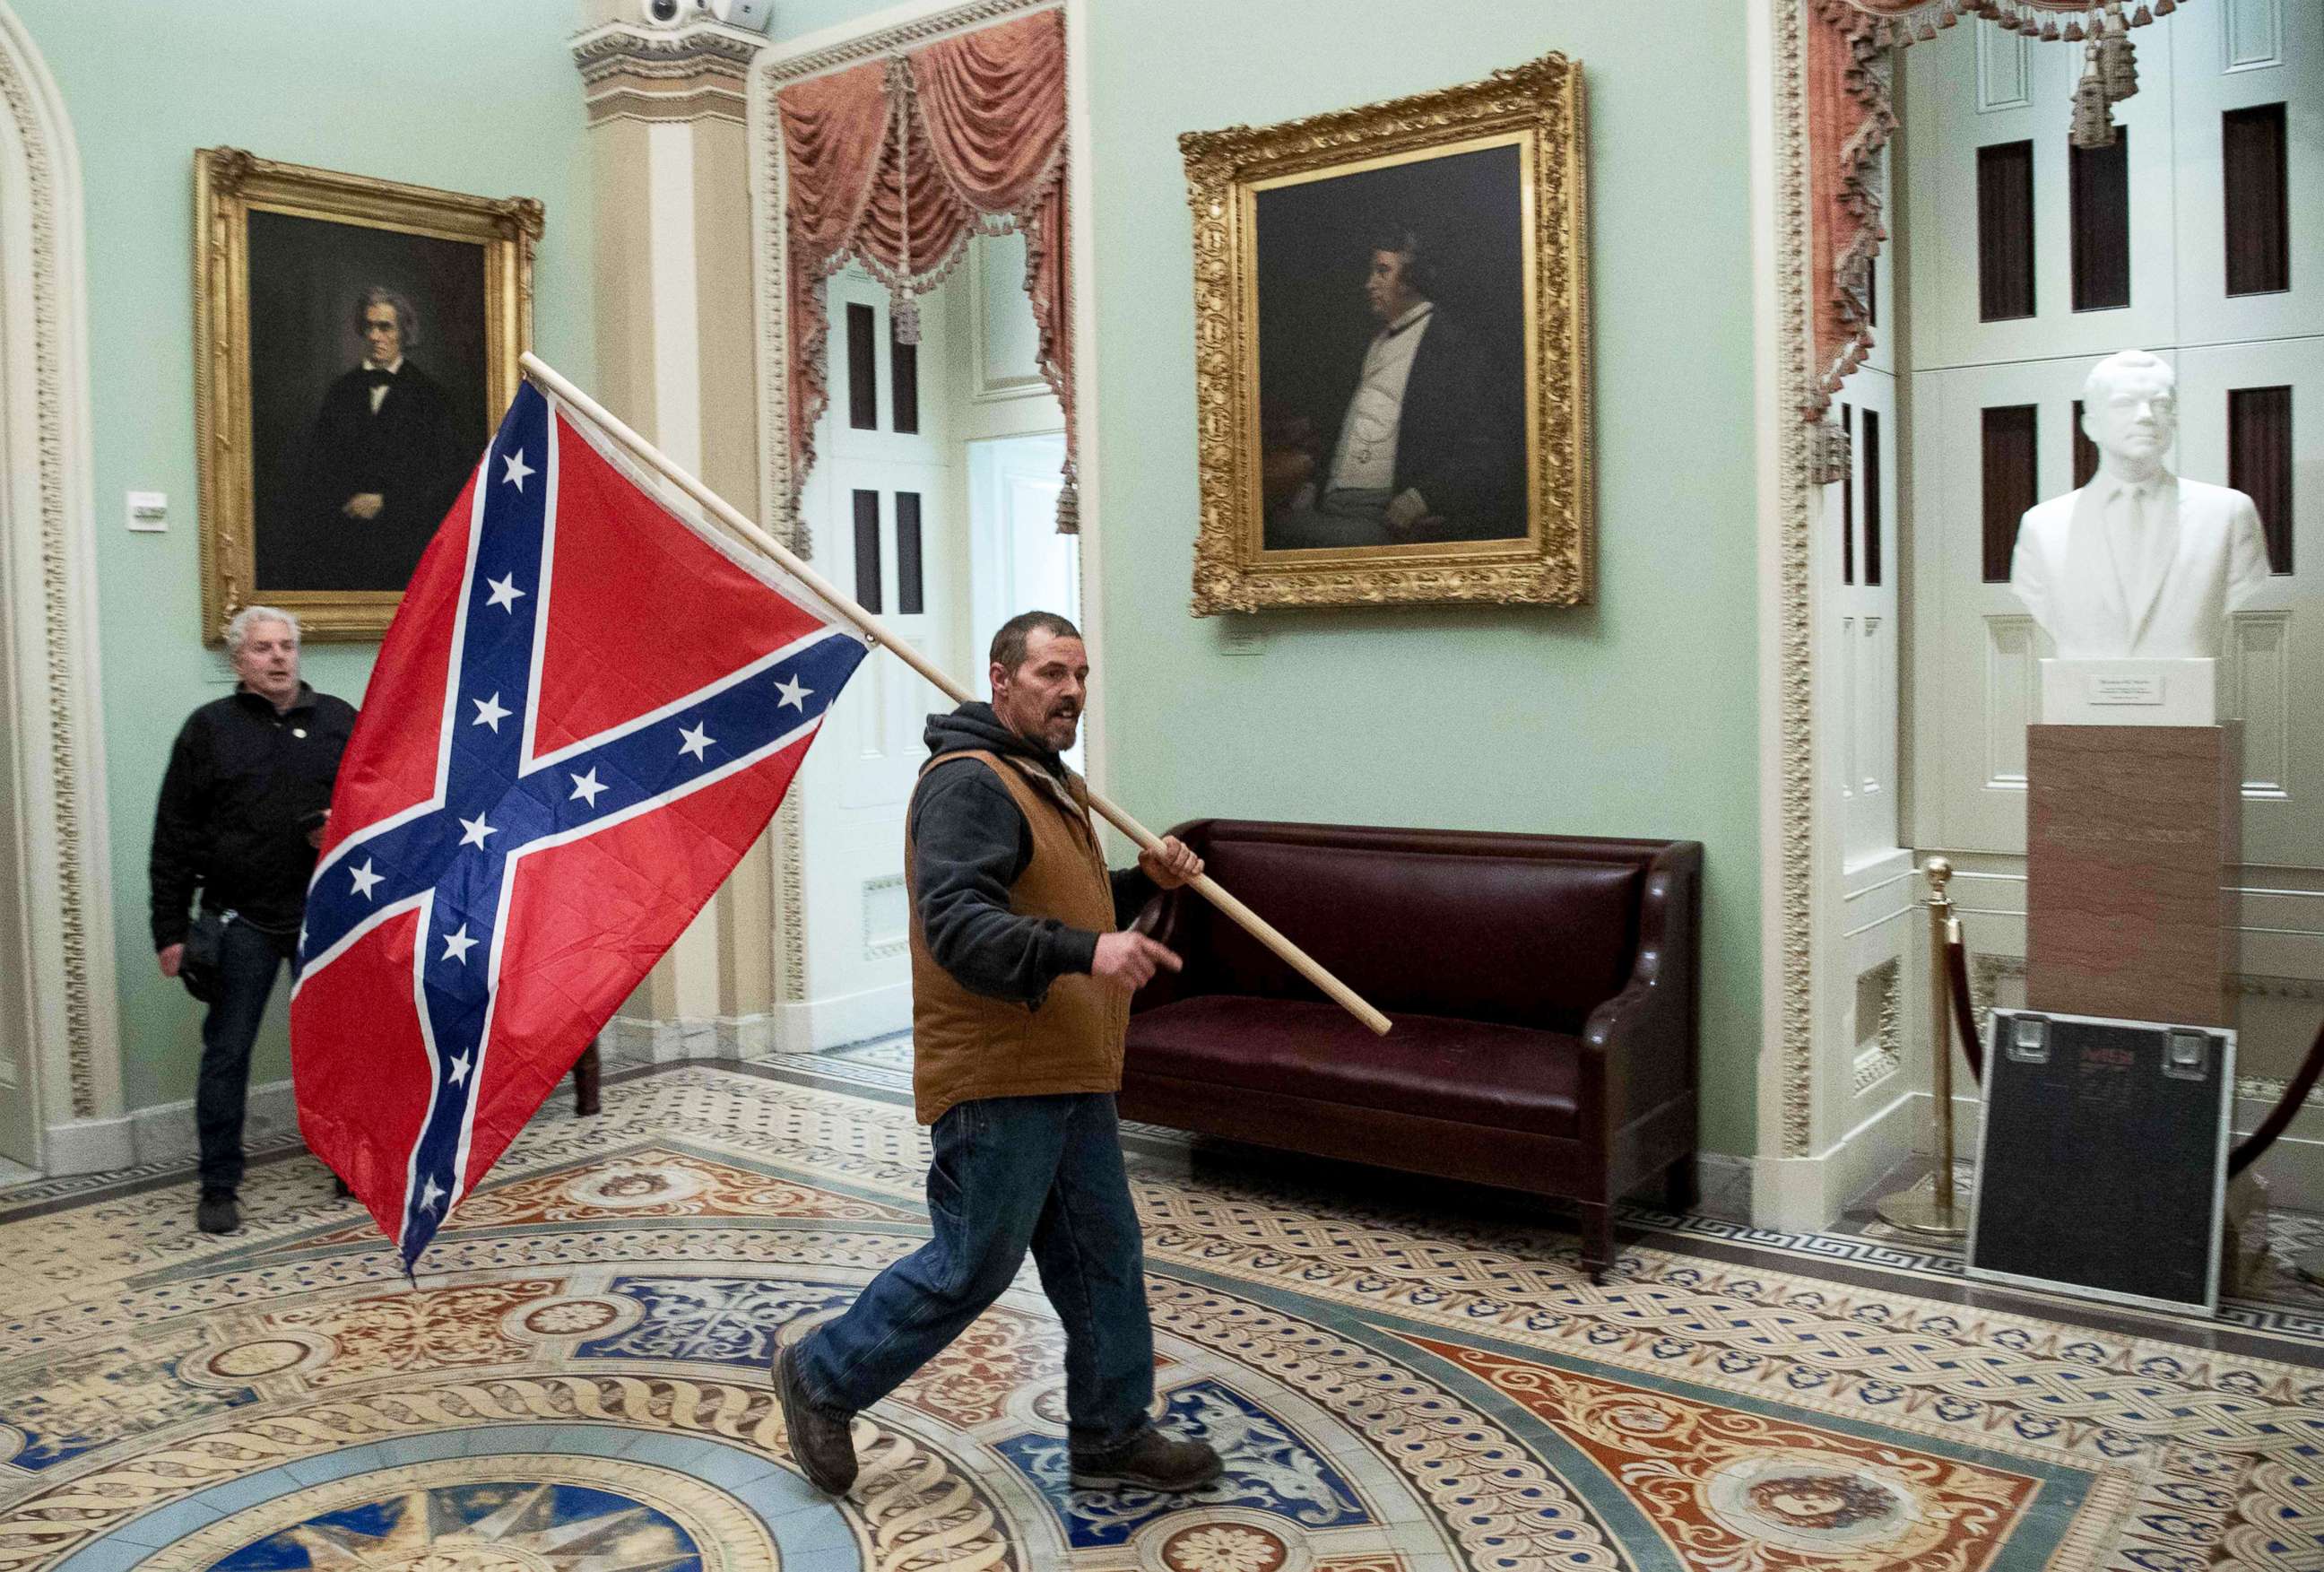 PHOTO: A supporter of President Donald Trump that breeched security and entered the U.S. Capitol in protest, carries the Confederate flag, Jan. 6, 2021, in Washington, D.C.